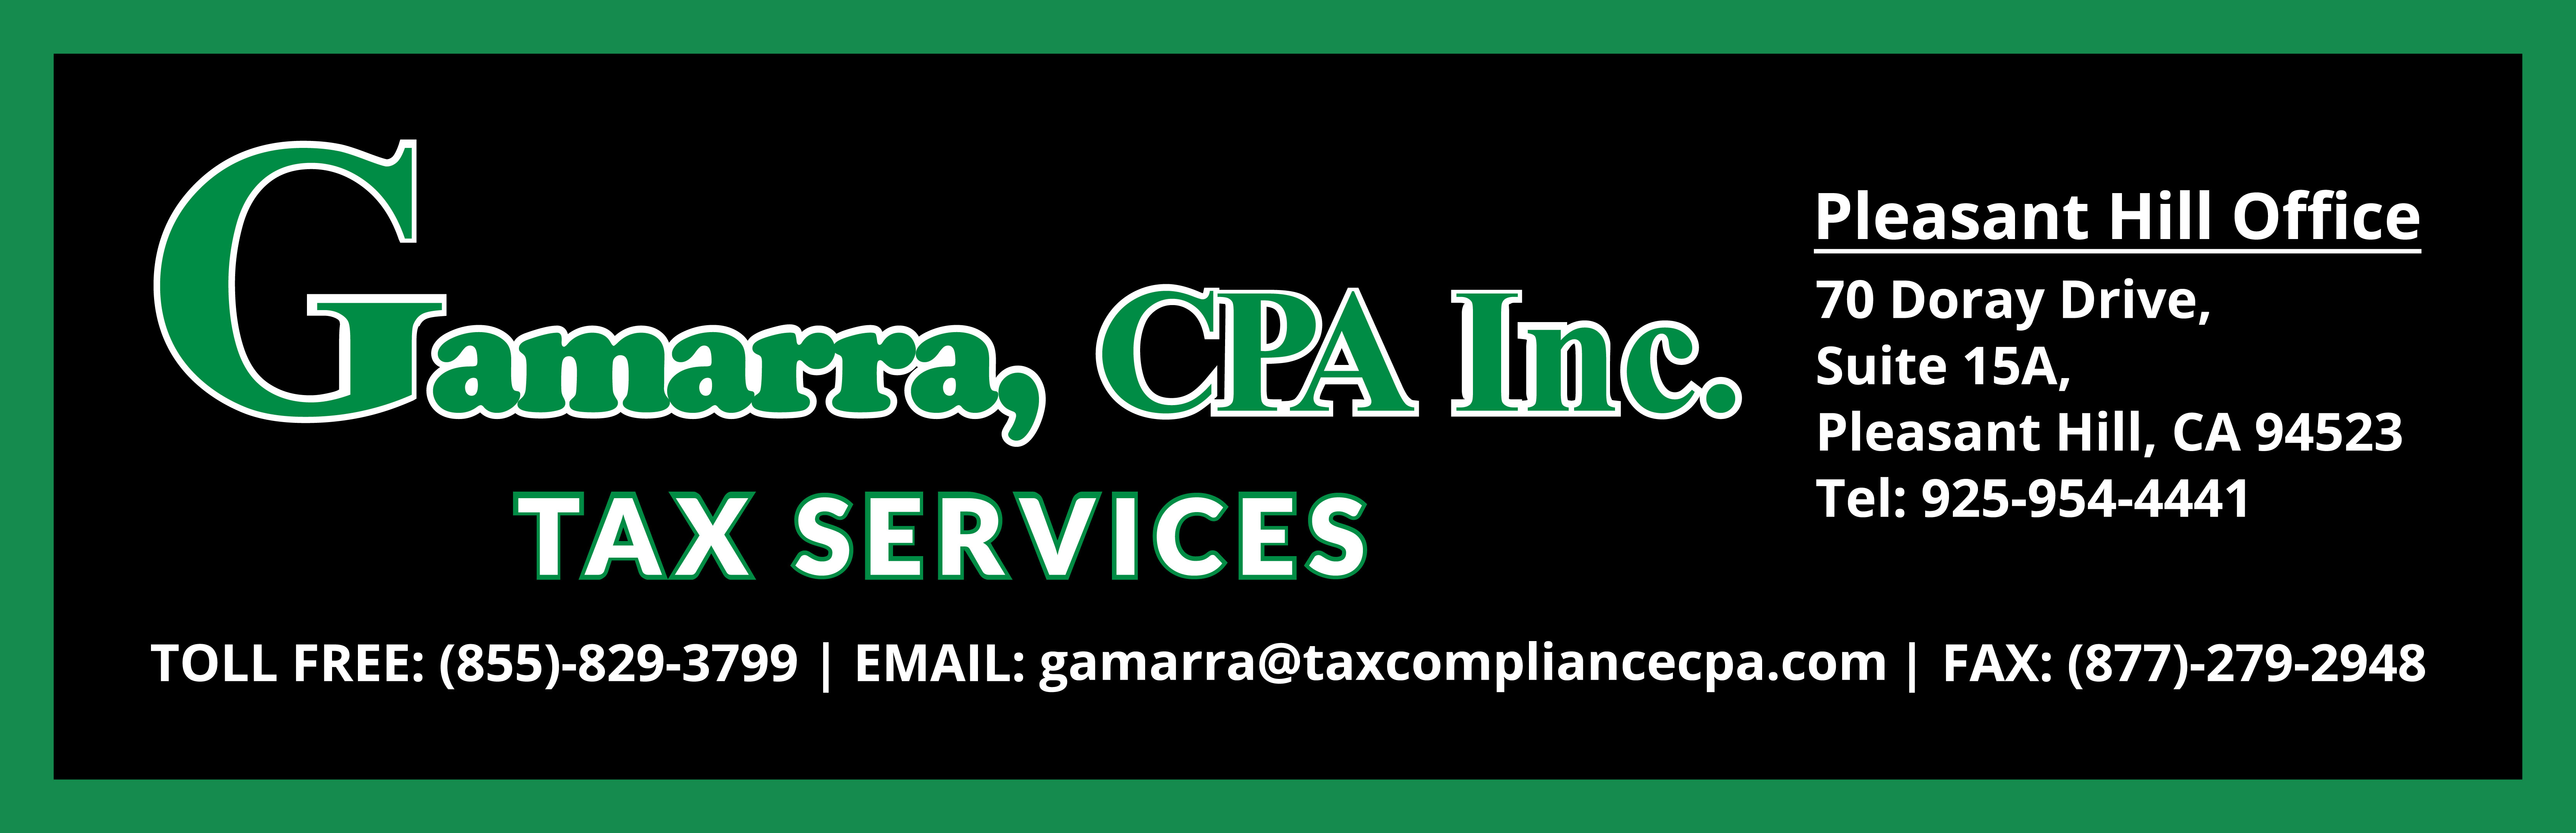 Tax Services with offices located in 2151 Salvio St, Concord, CA 94520 and 313 N. Glebe Rd, Arlington, VA 22203